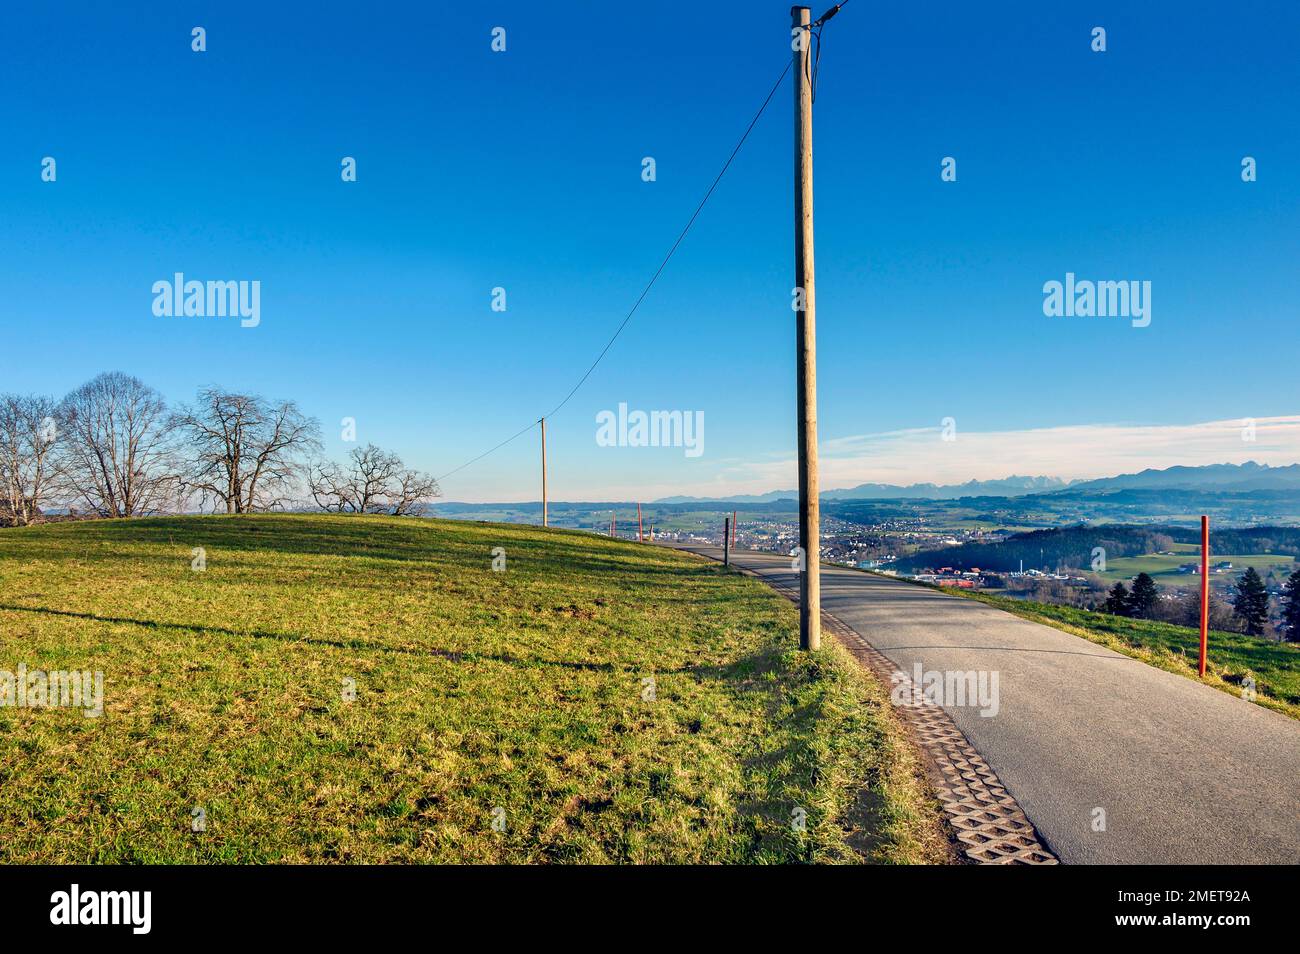 Country road and wooden electricity pylons at Mariaberg, Allgaeu, Bavaria, Germany Stock Photo